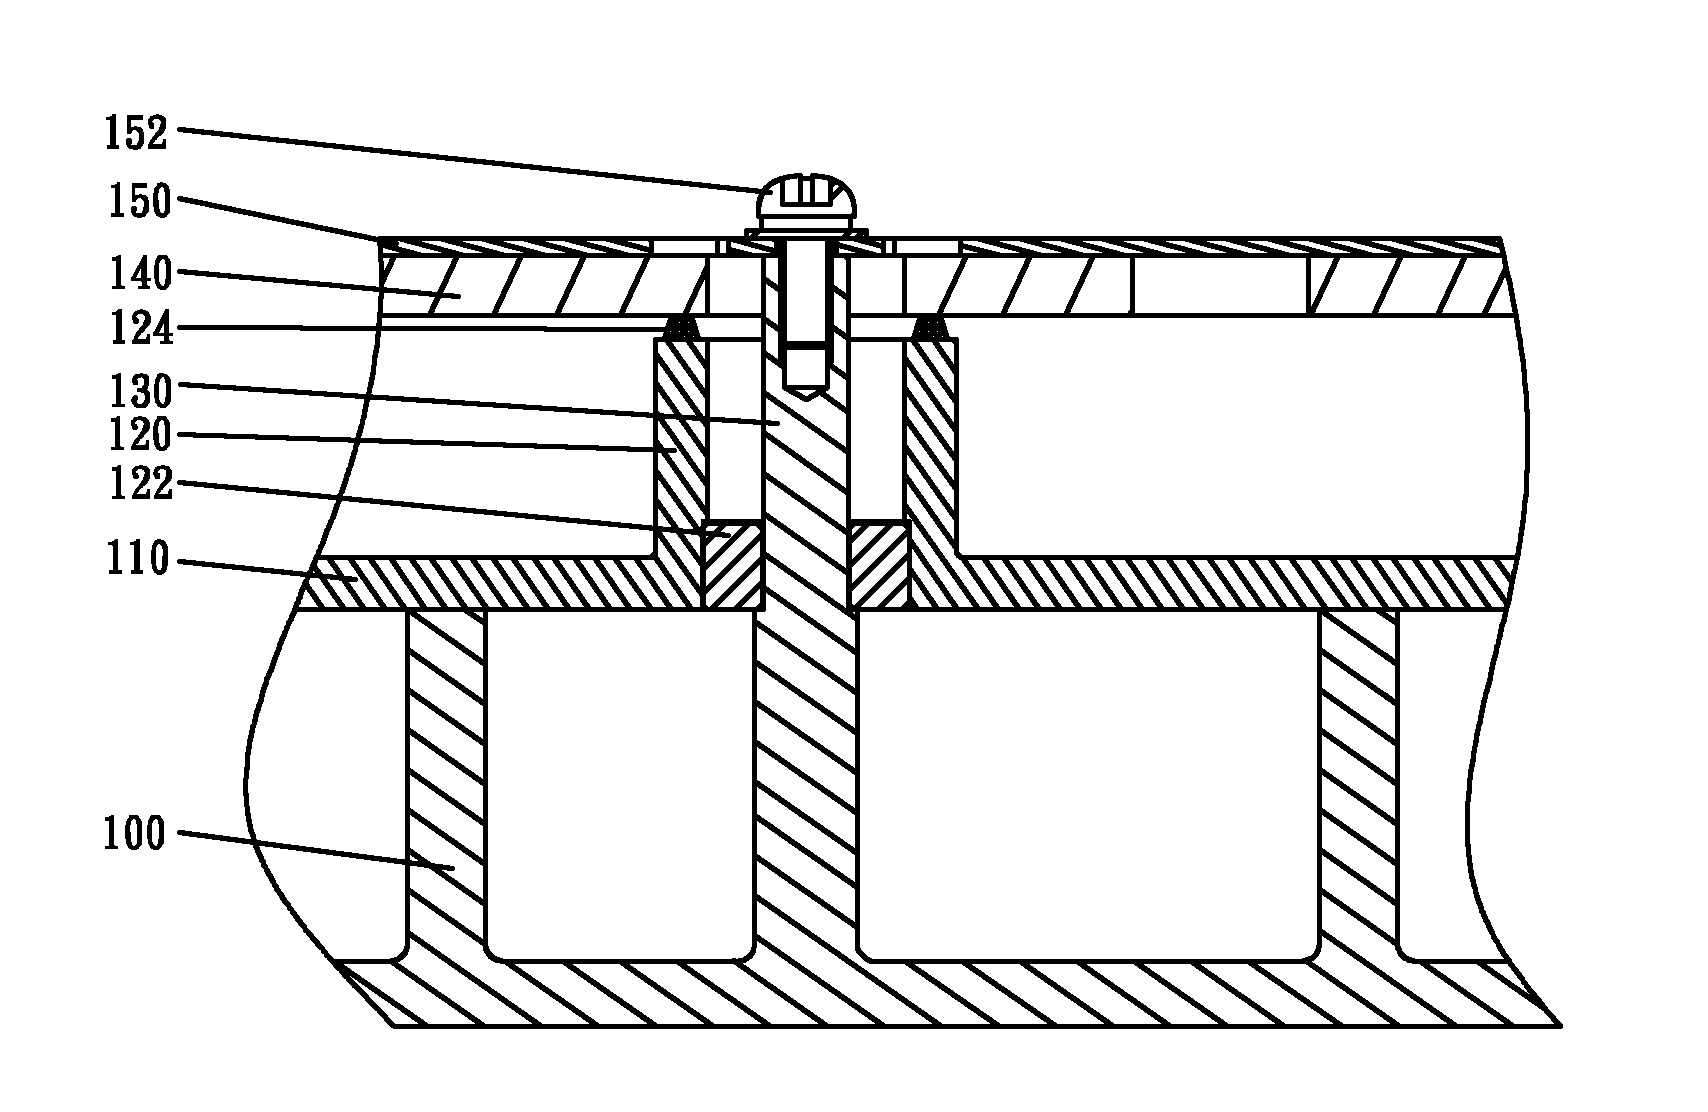 Cavity filter and communication equipment